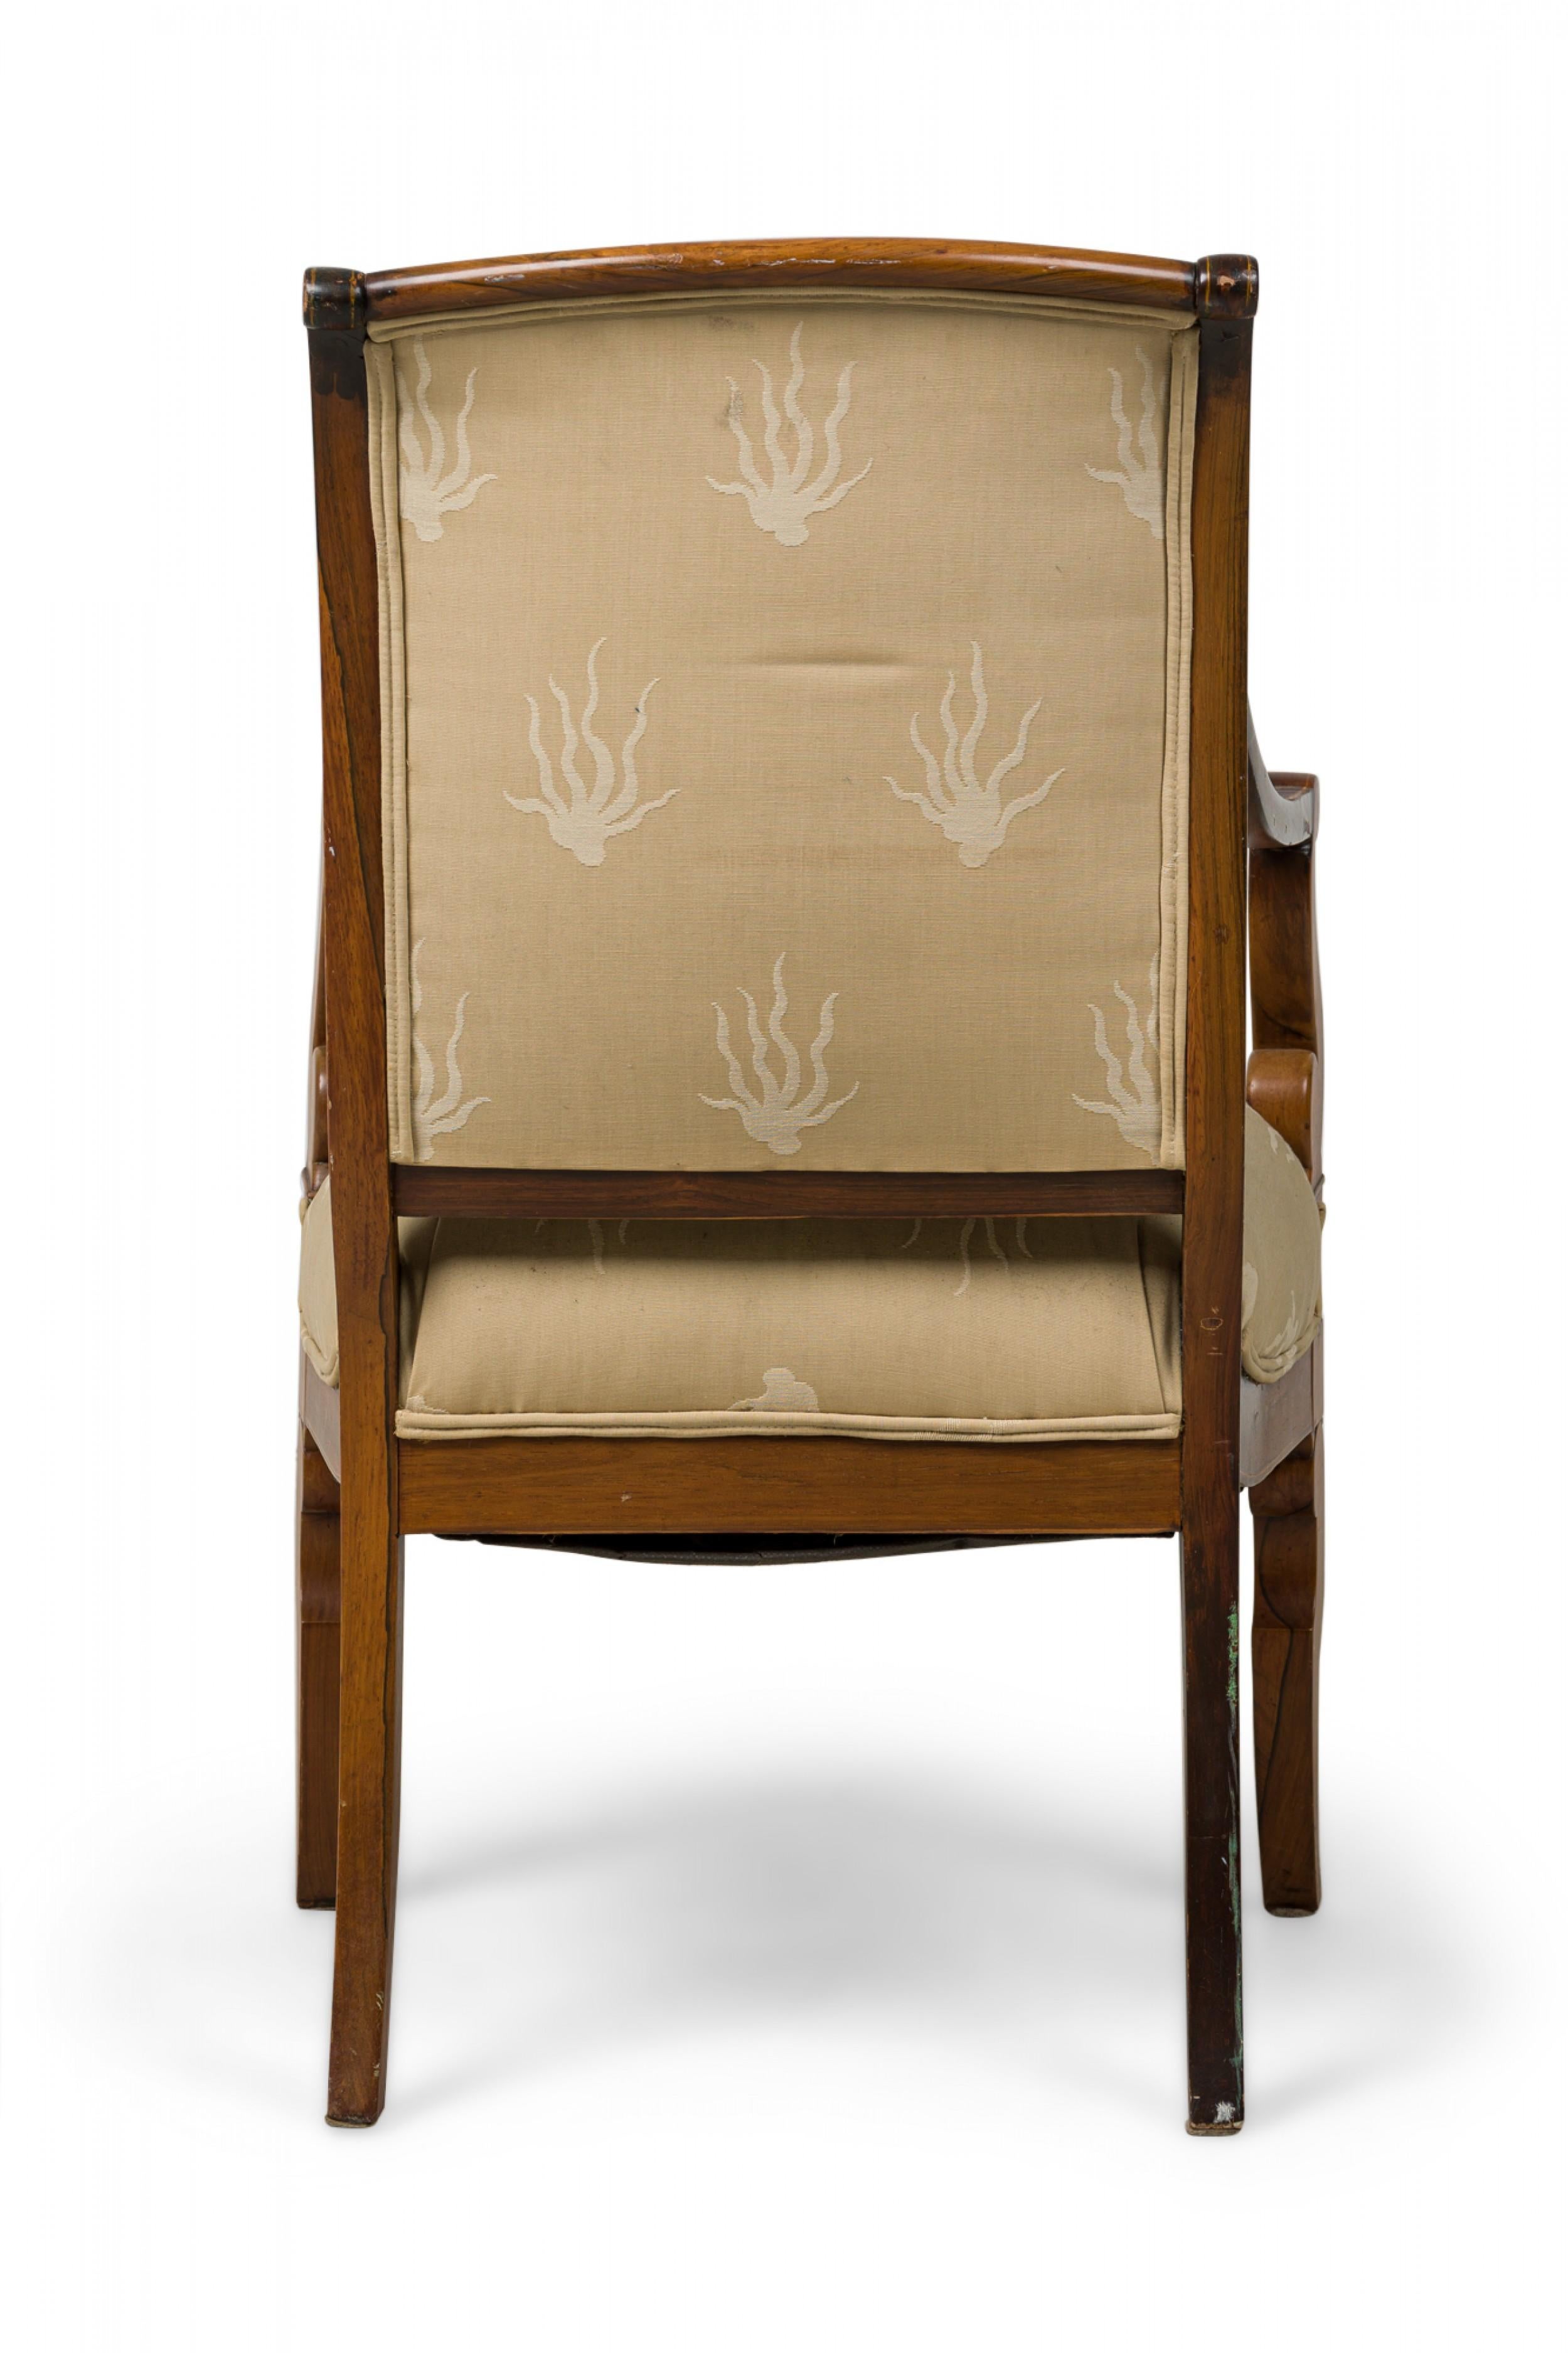 19th Century French Charles X Inlaid Mahogany and Walnut Open Armchair in Beige Upholstery For Sale